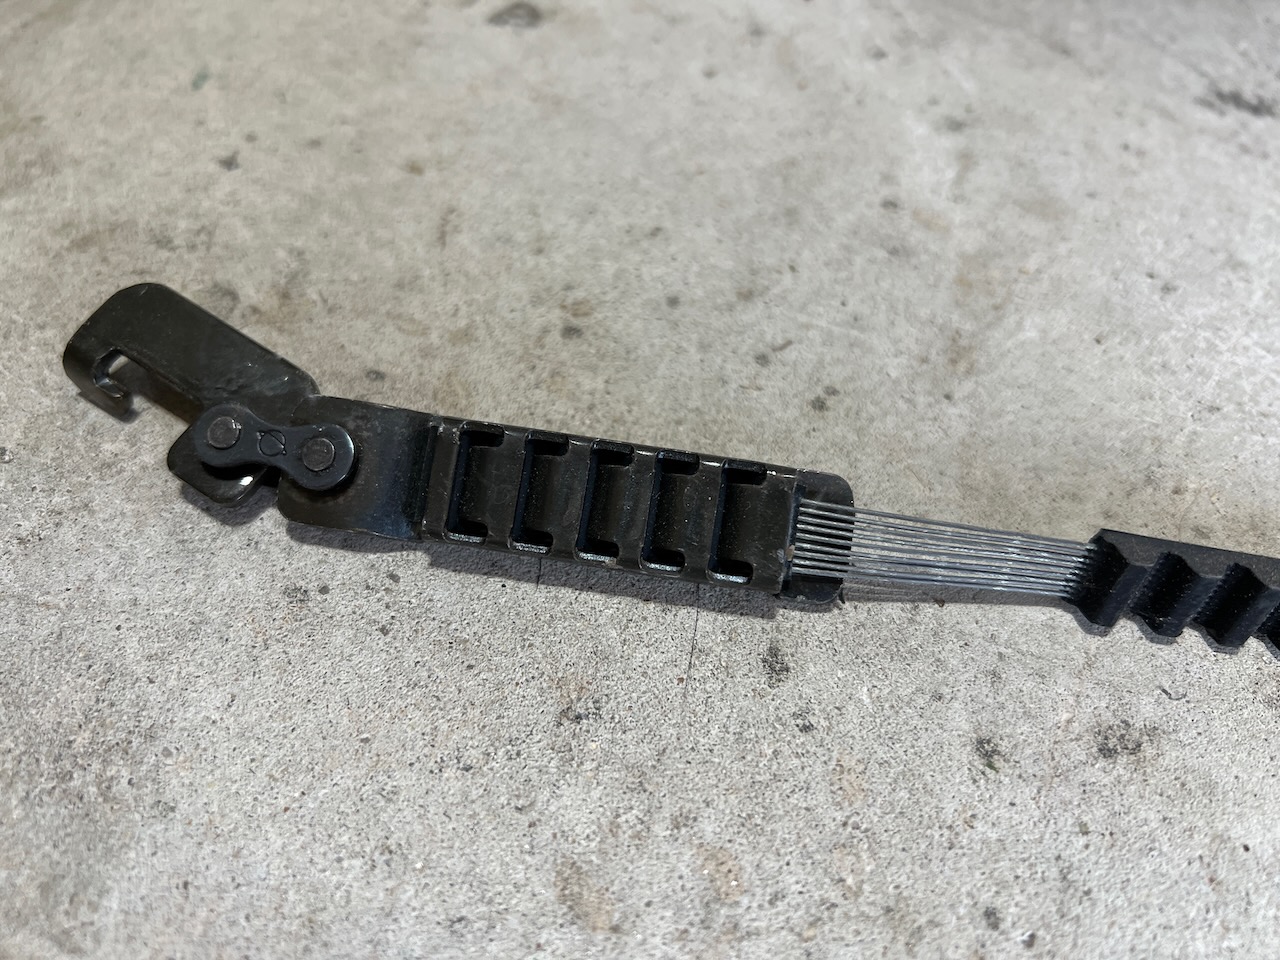 Rubber cogs stripped off drive belt.